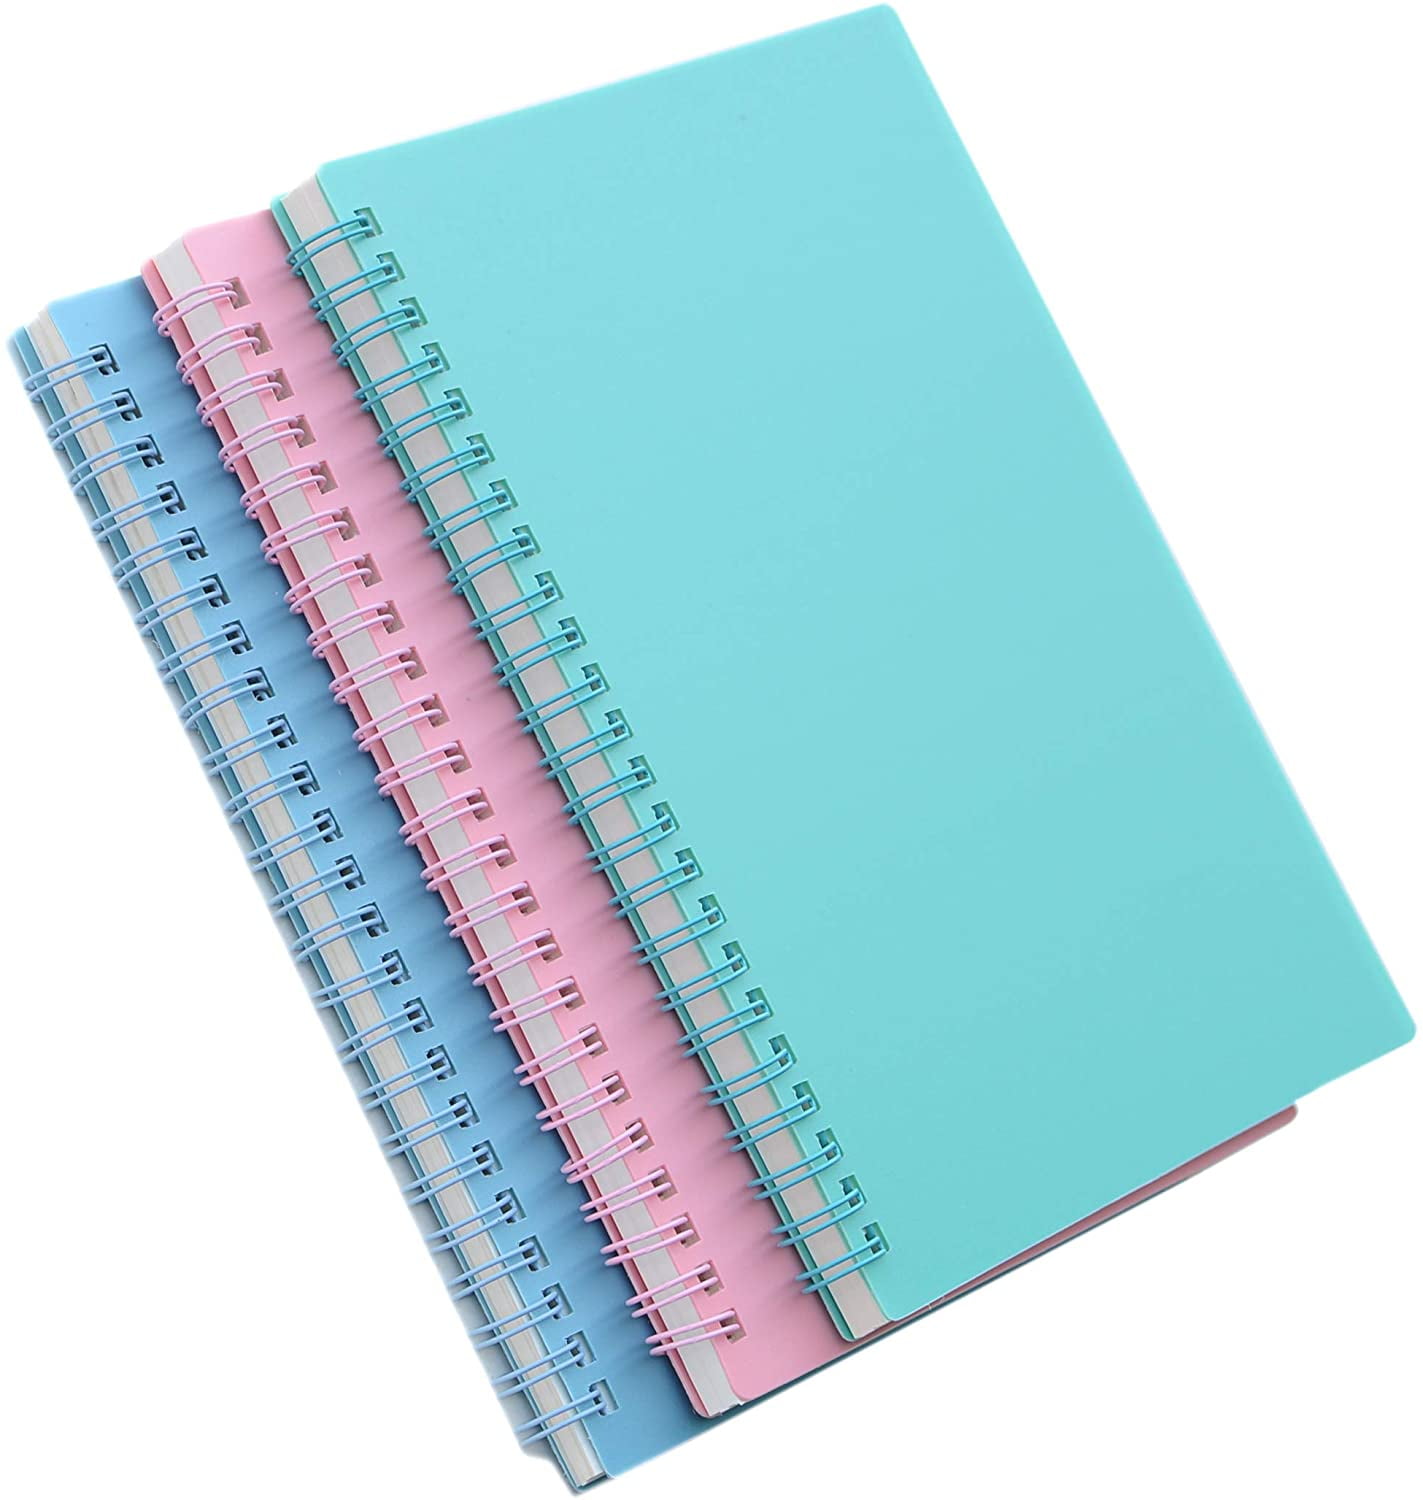 A5 Twinwire Pastel Soft Cover Notebooks Lilac Pink Green Black Grey School Work 